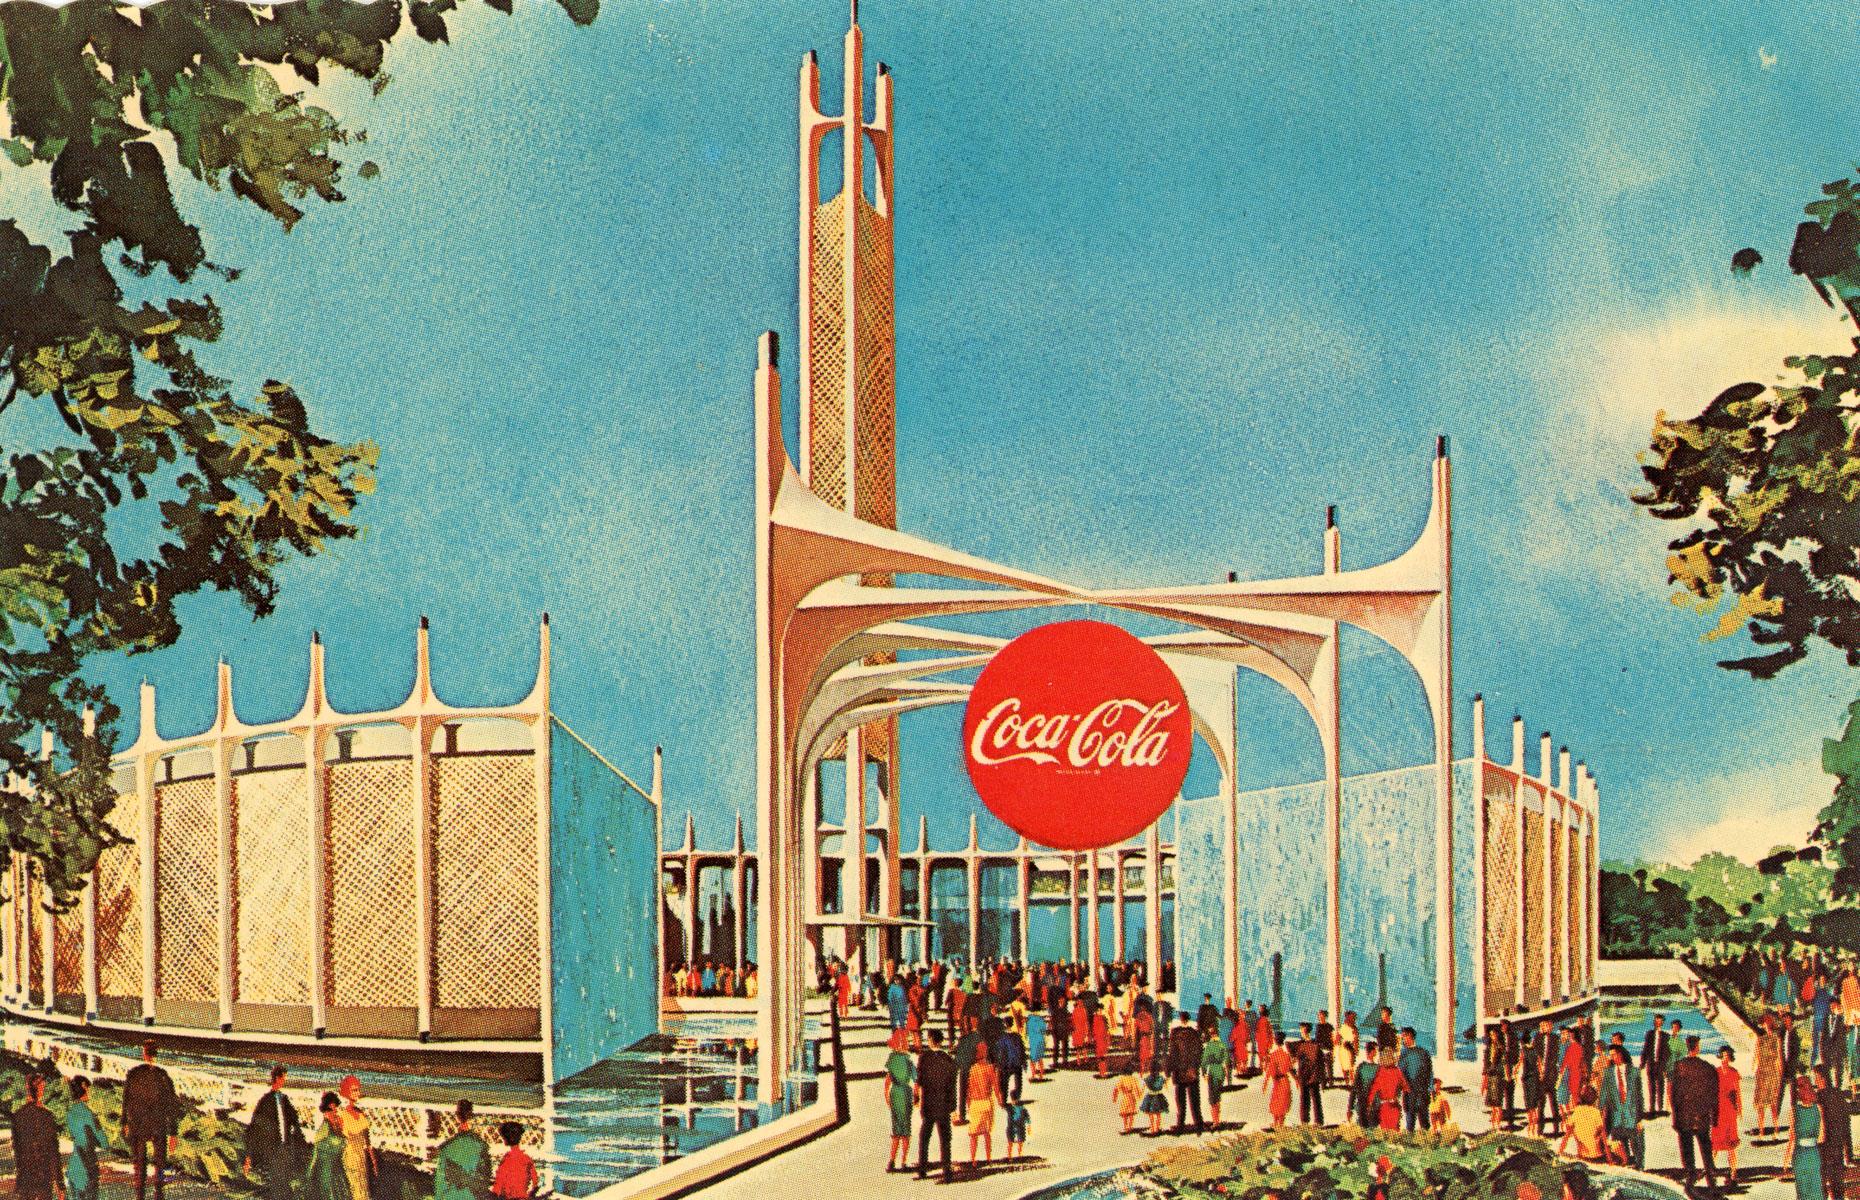 1963 – Coca-Cola: $1,000 invested then is worth $82 million (£62.1m) + dividends today